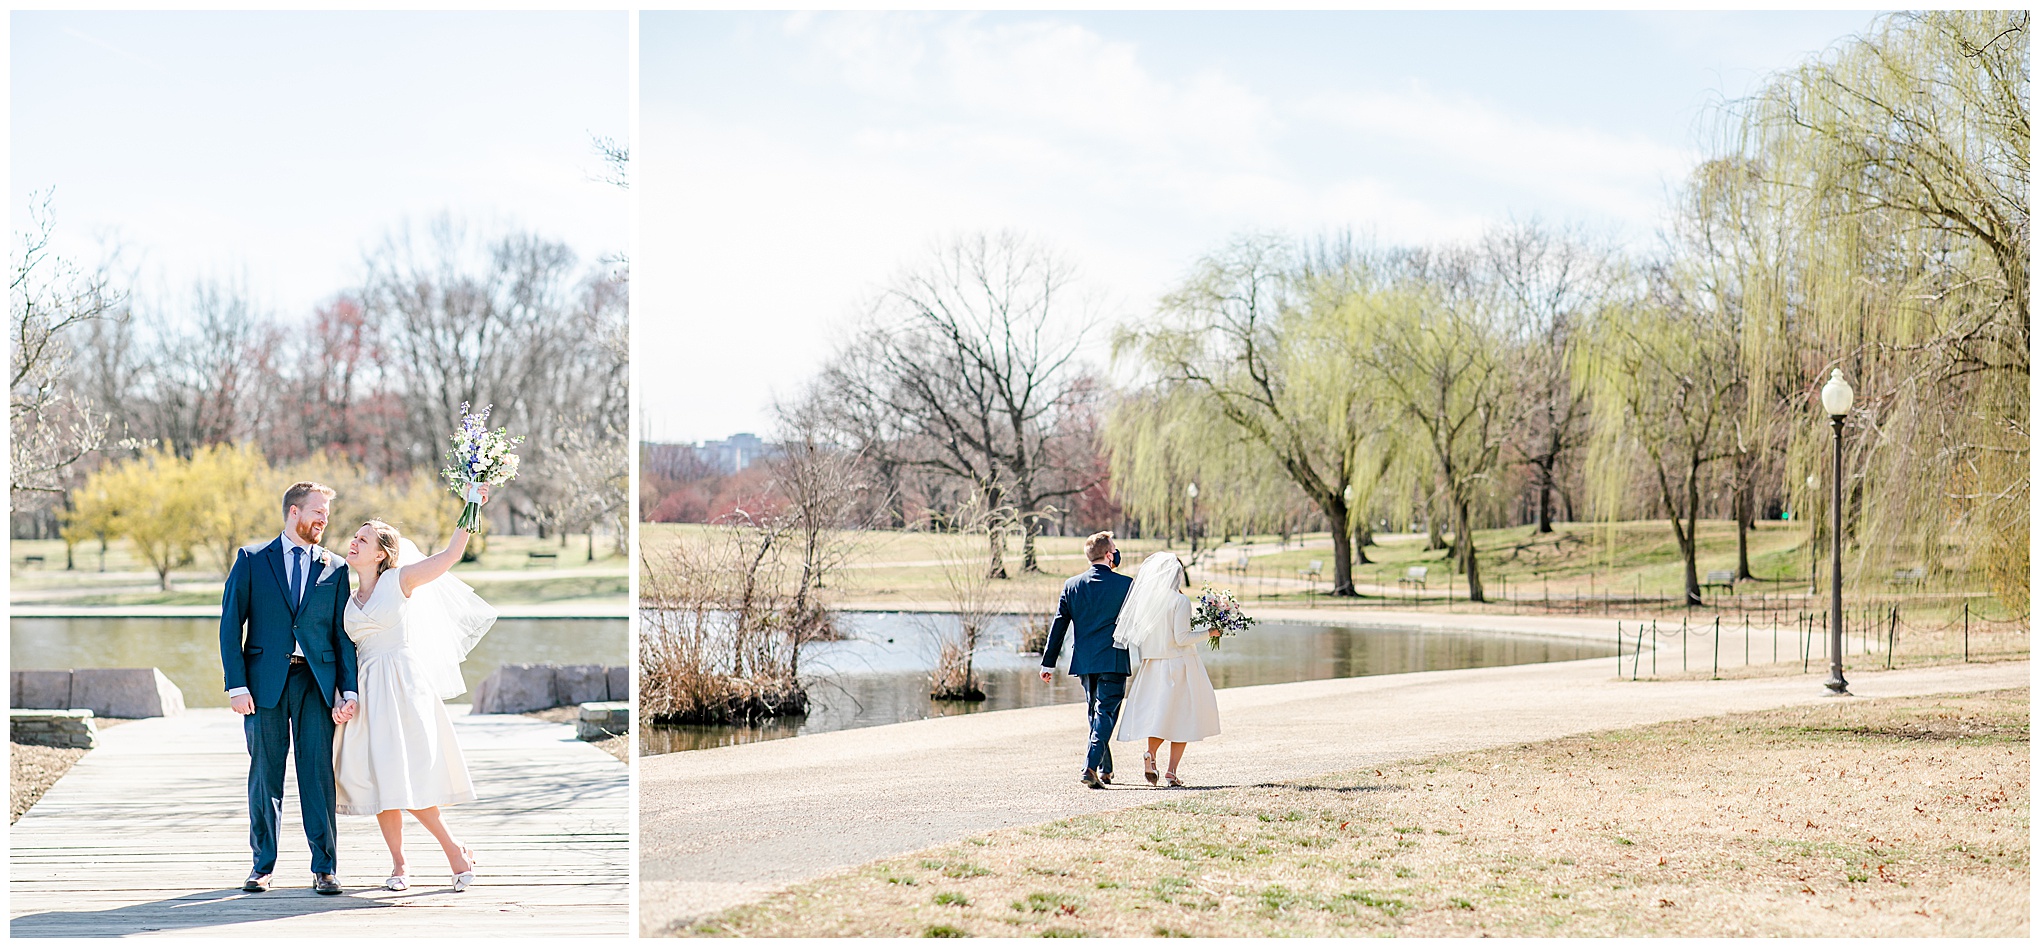 Constitution Gardens elopement, DC elopement, DC winter wedding, DC wedding photographer, DC elopement photographer, small wedding, DC photographer, Constitution Gardens DC, winter elopement, Rachel E.H. Photography, DC portraits, newlywed portraits, bride and groom portraits, excited newlyweds